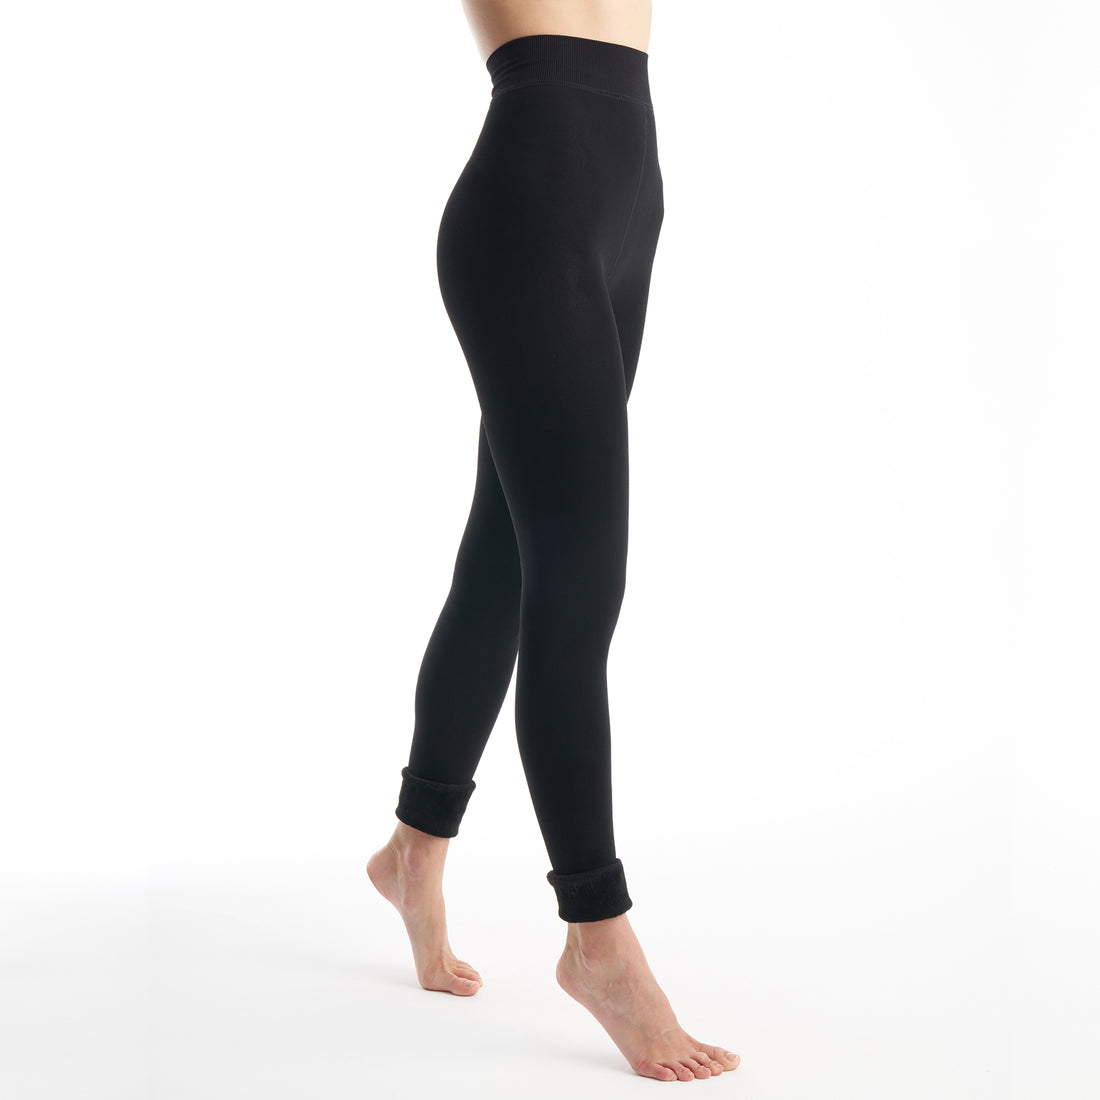 Buy ALAXENDER Fleece Lined Tights Women Warm Fake Translucent